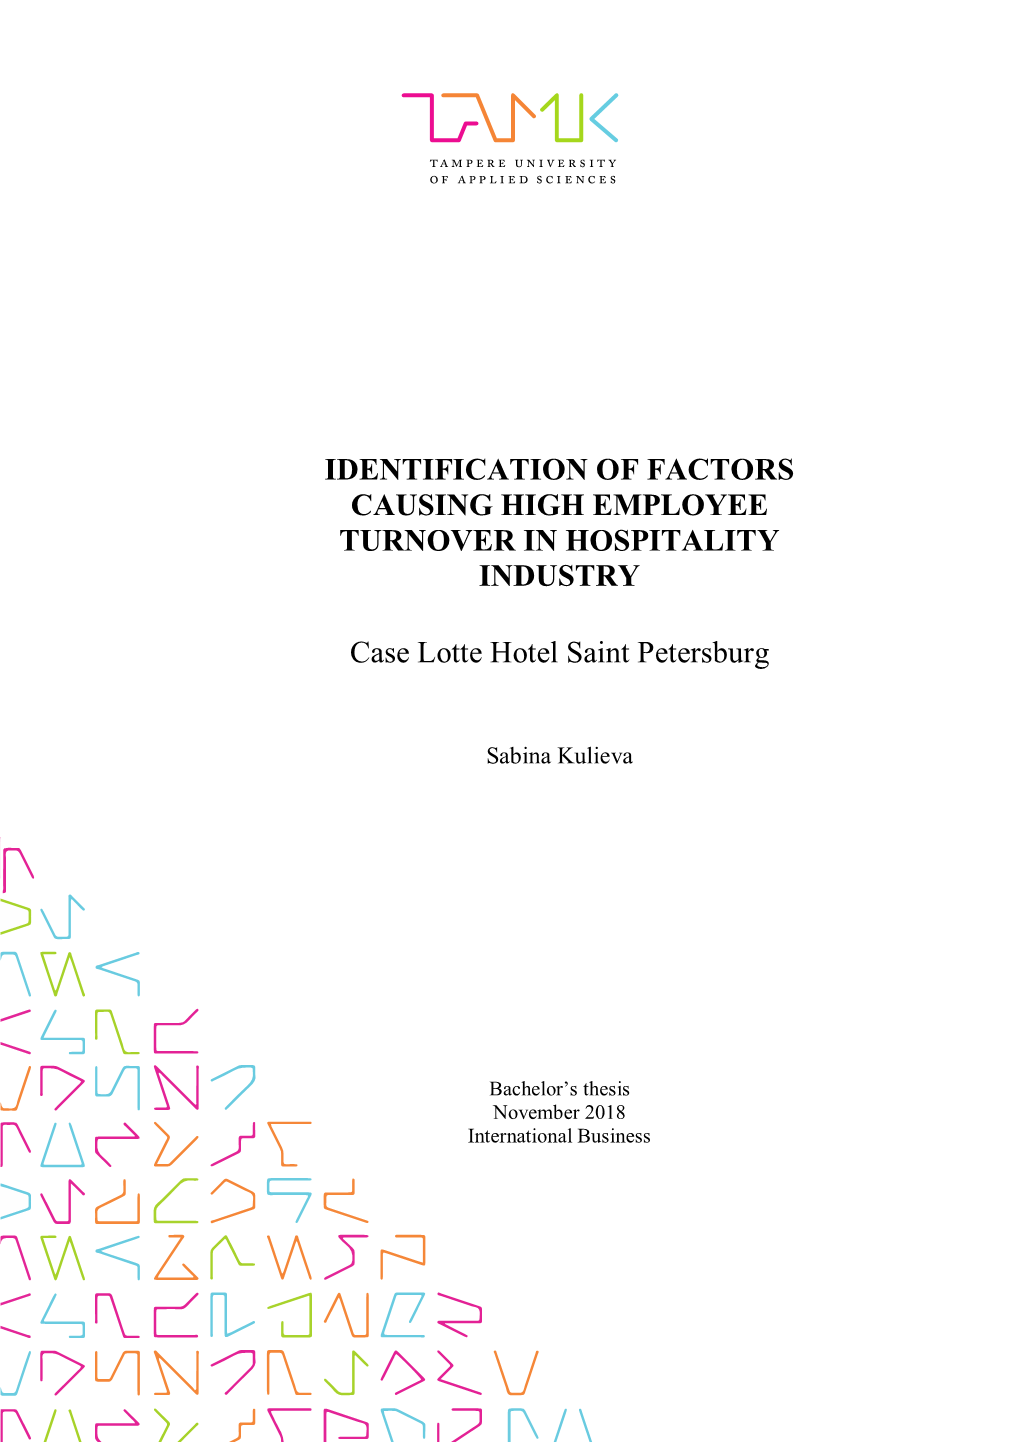 Identification of Factors Causing High Employee Turnover in Hospitality Industry